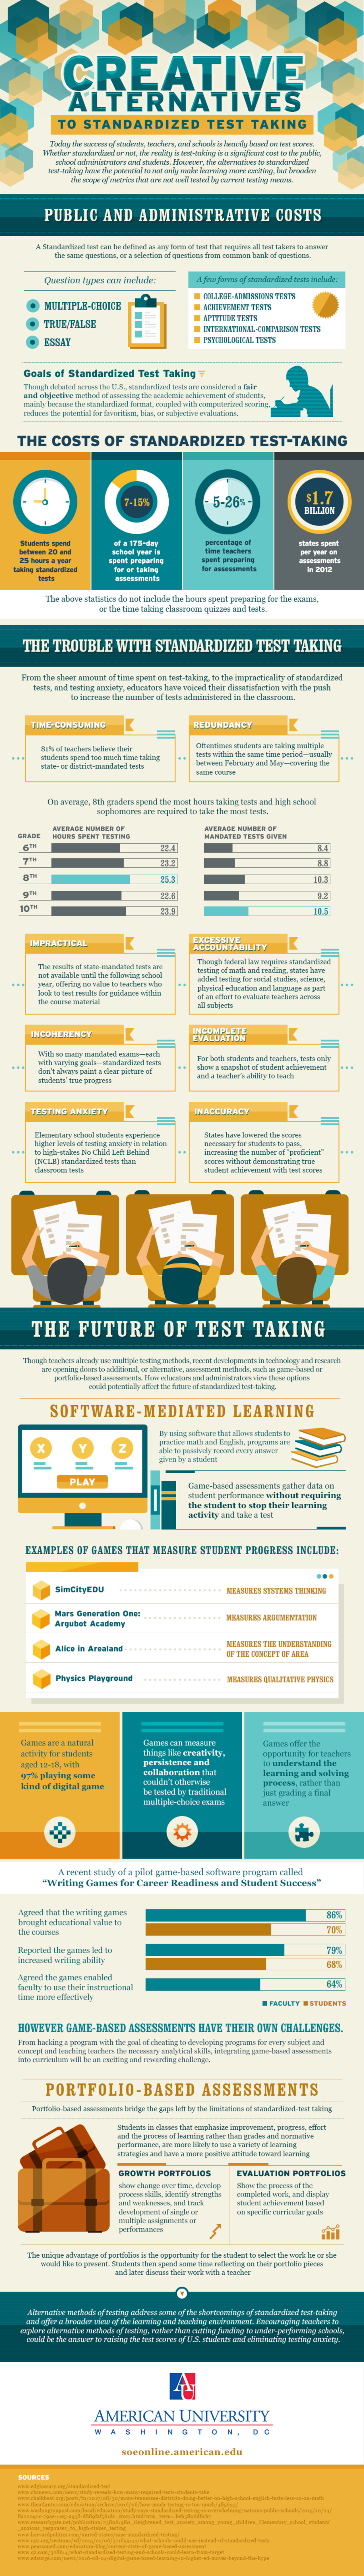 Infographic on Creative Alternatives to test taking